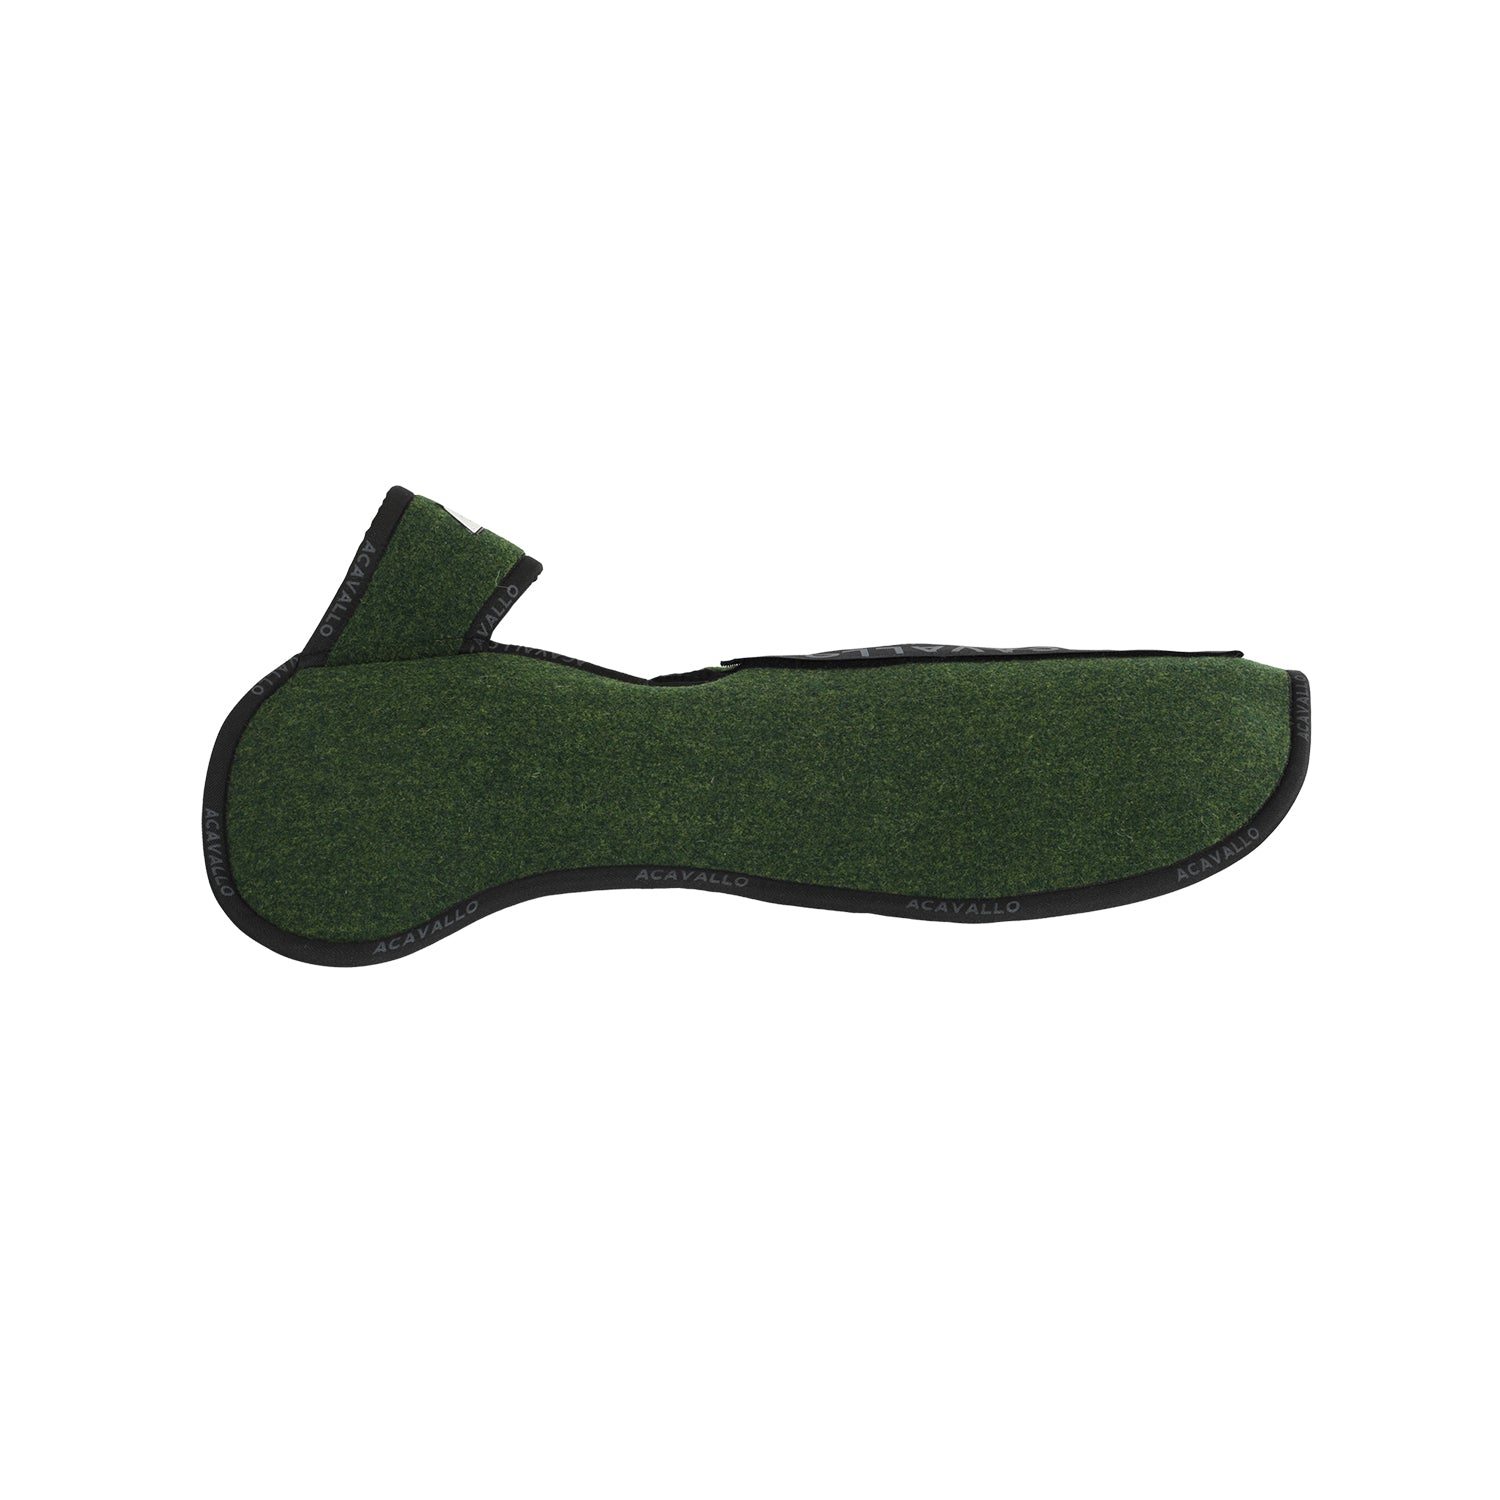 Pad WITHERS FREE POCKET CONFIGURATION PAD DOUBLE FELT WITH DOUBLE FELT - Reitstiefel Kandel - Dein Reitshop